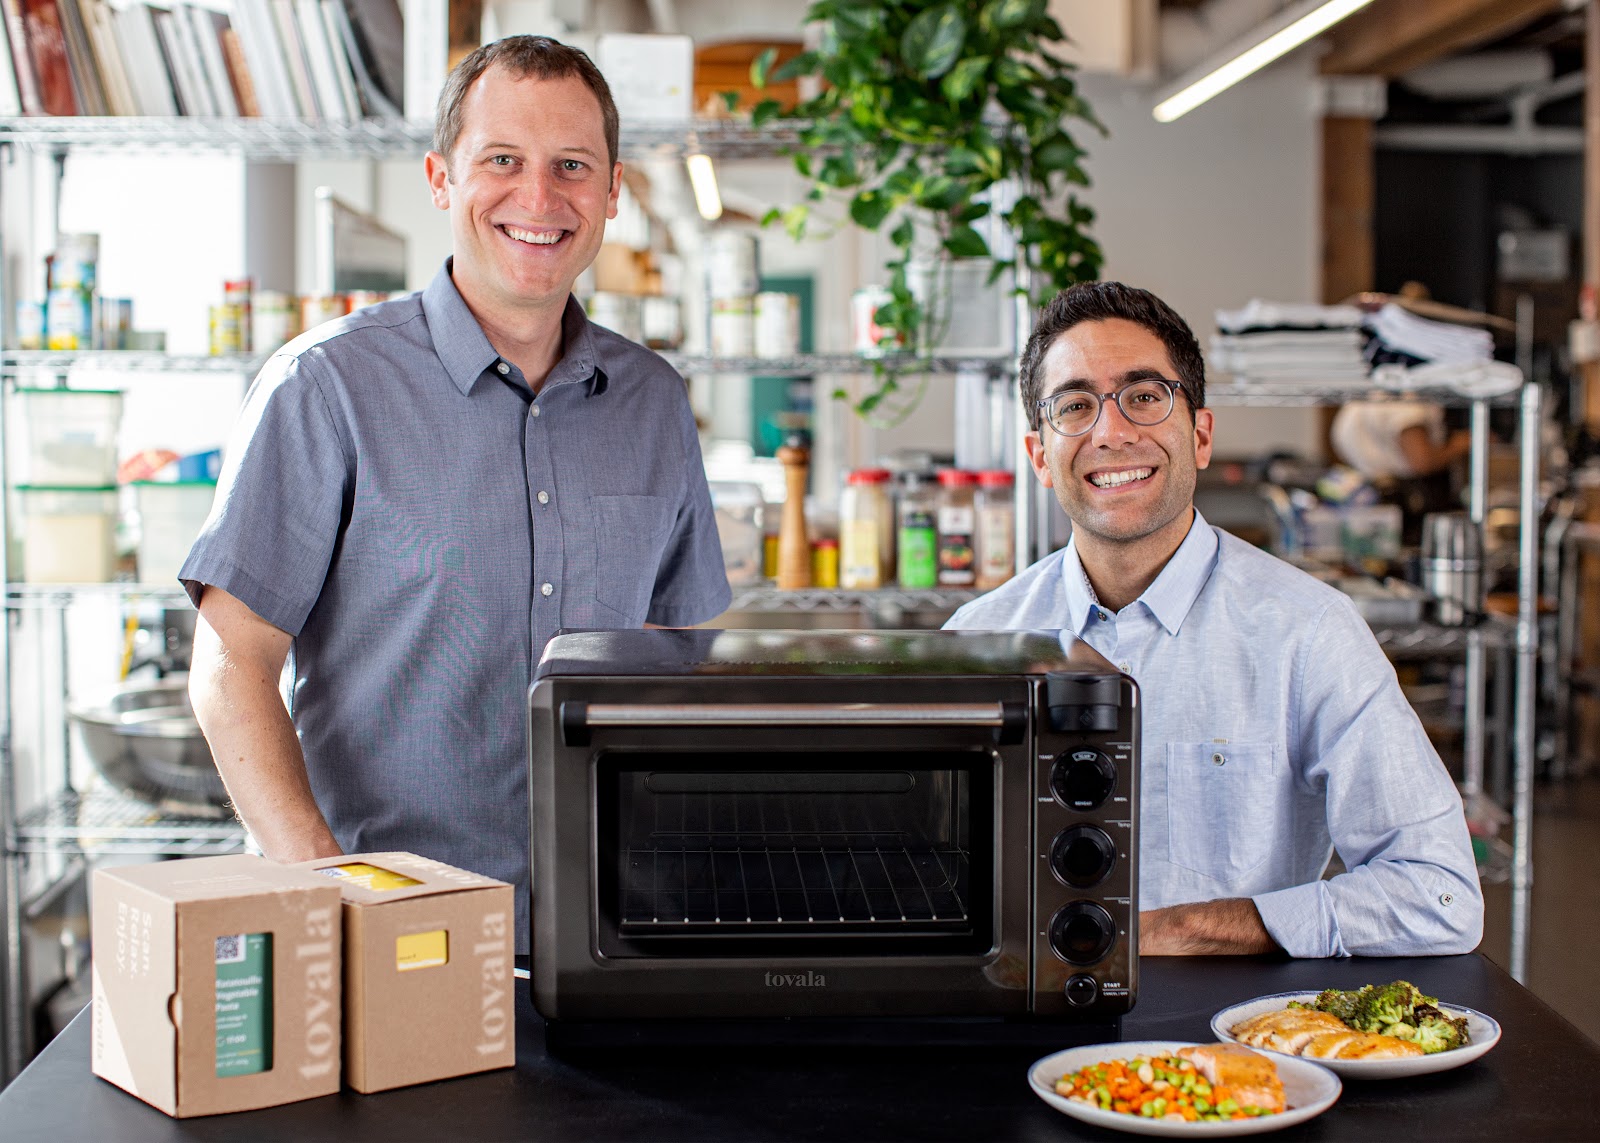 Tovala’s founders with its smart oven 